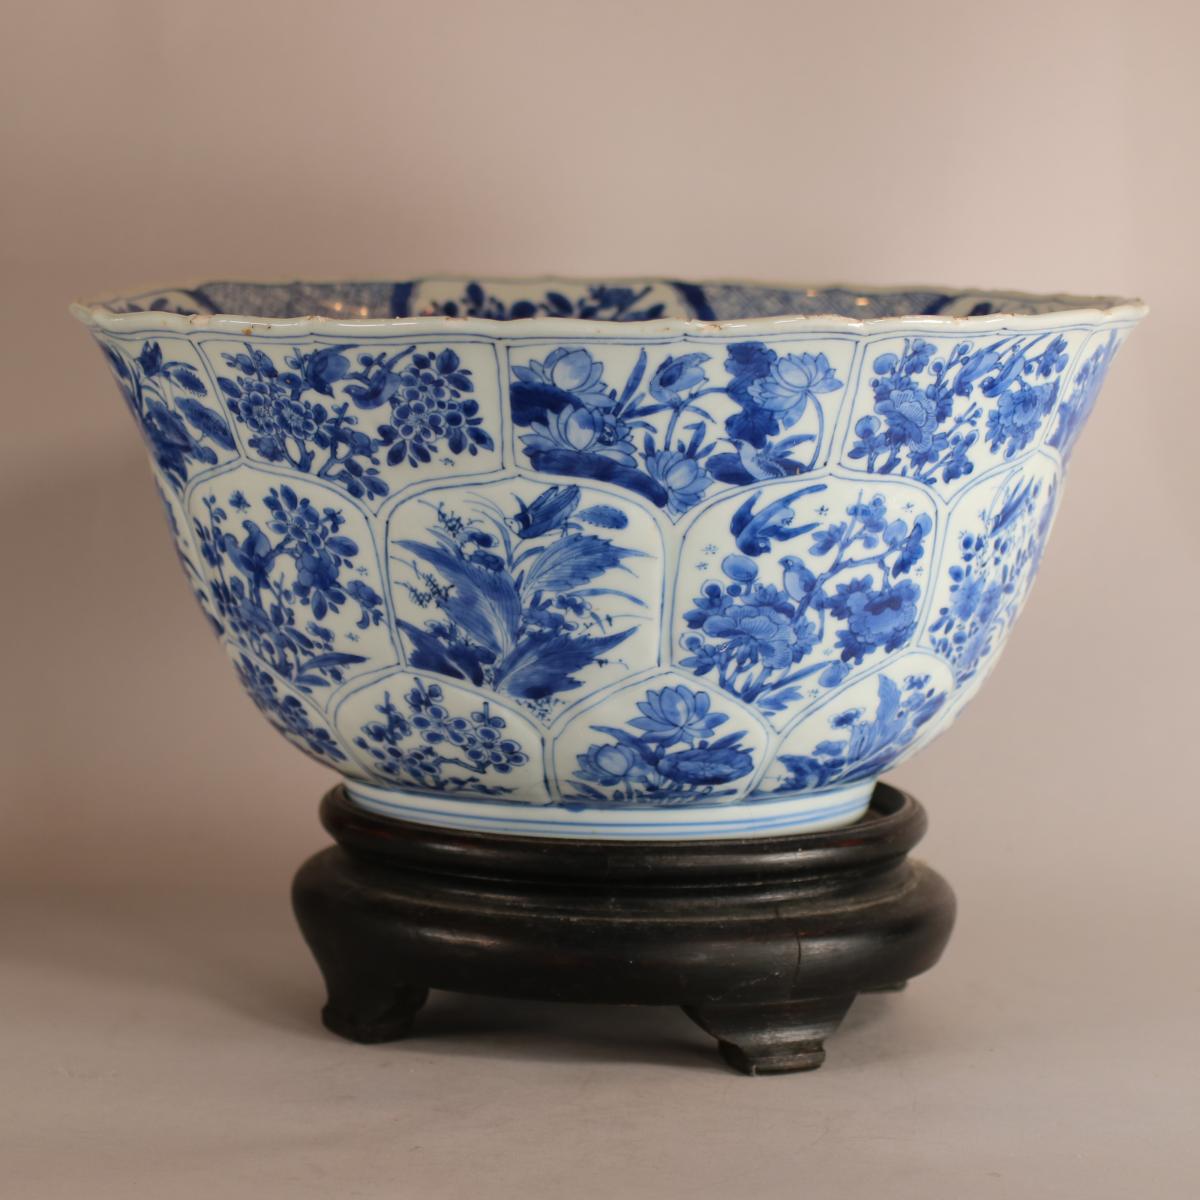 Kangxi moulded blue and white bowl with birds and flowers